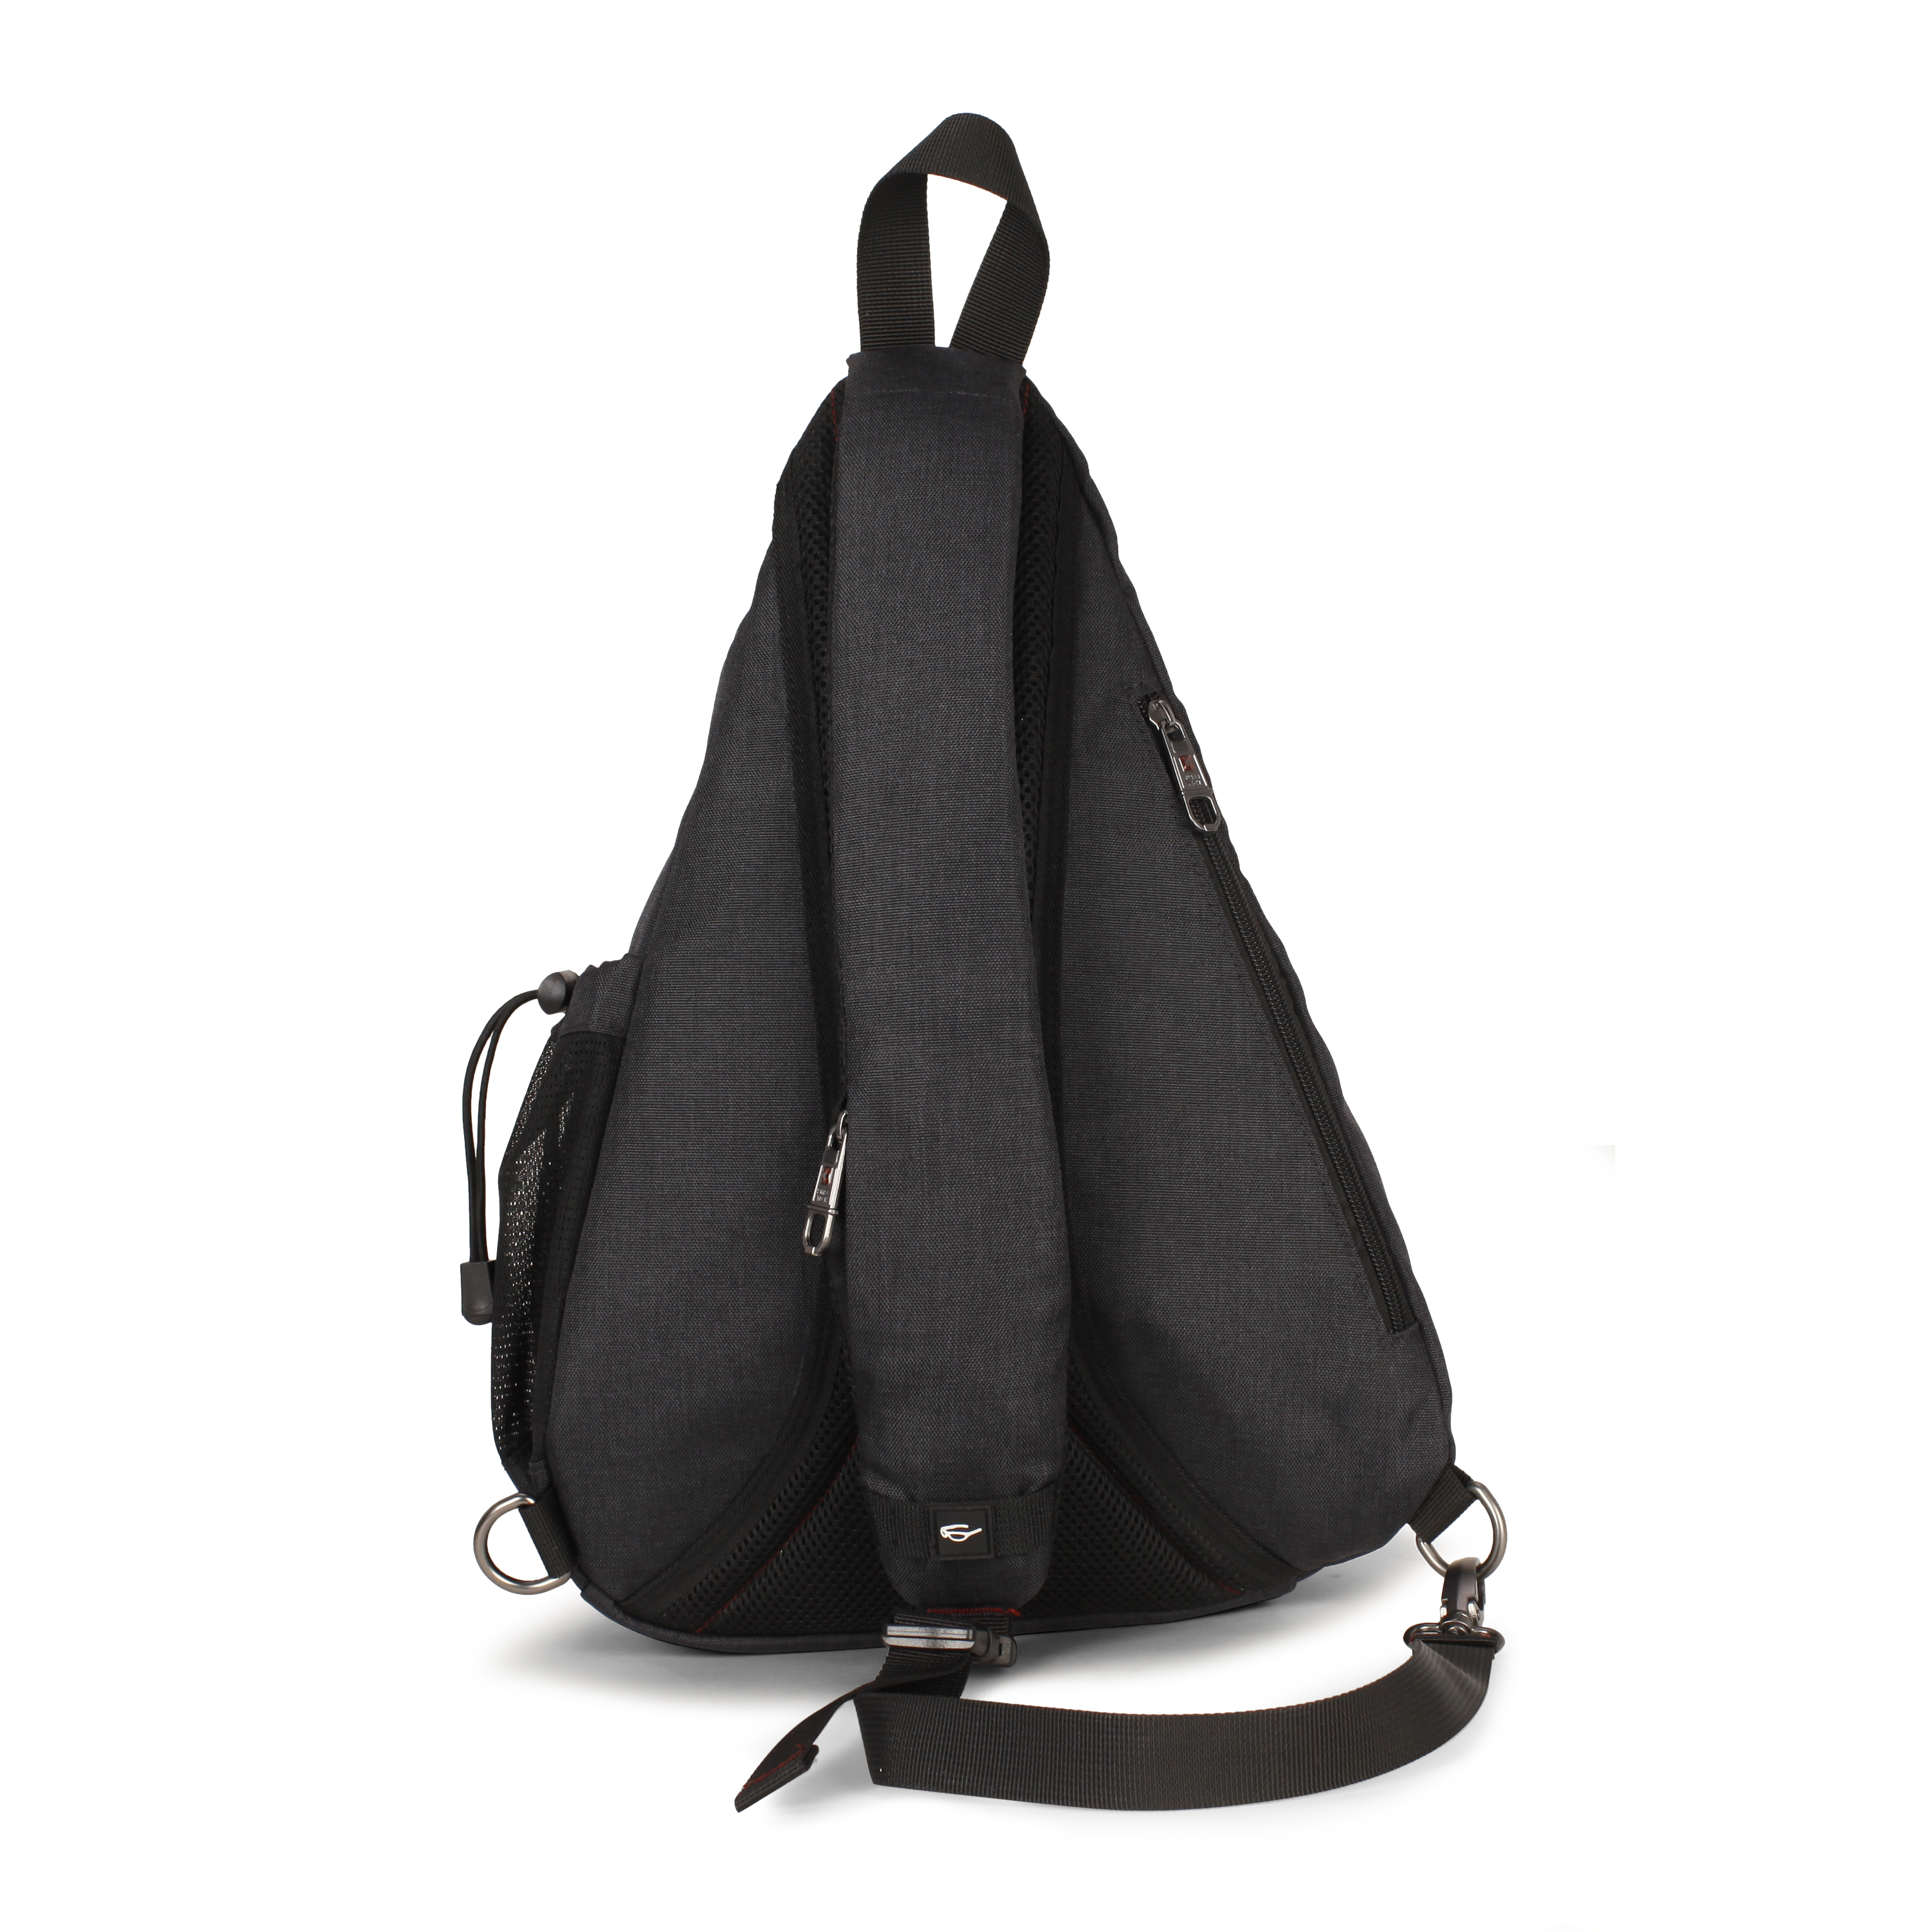 SwissTech Travel Sling Backpack, Black (All Ages) (Walmart Exclusive) - image 5 of 10